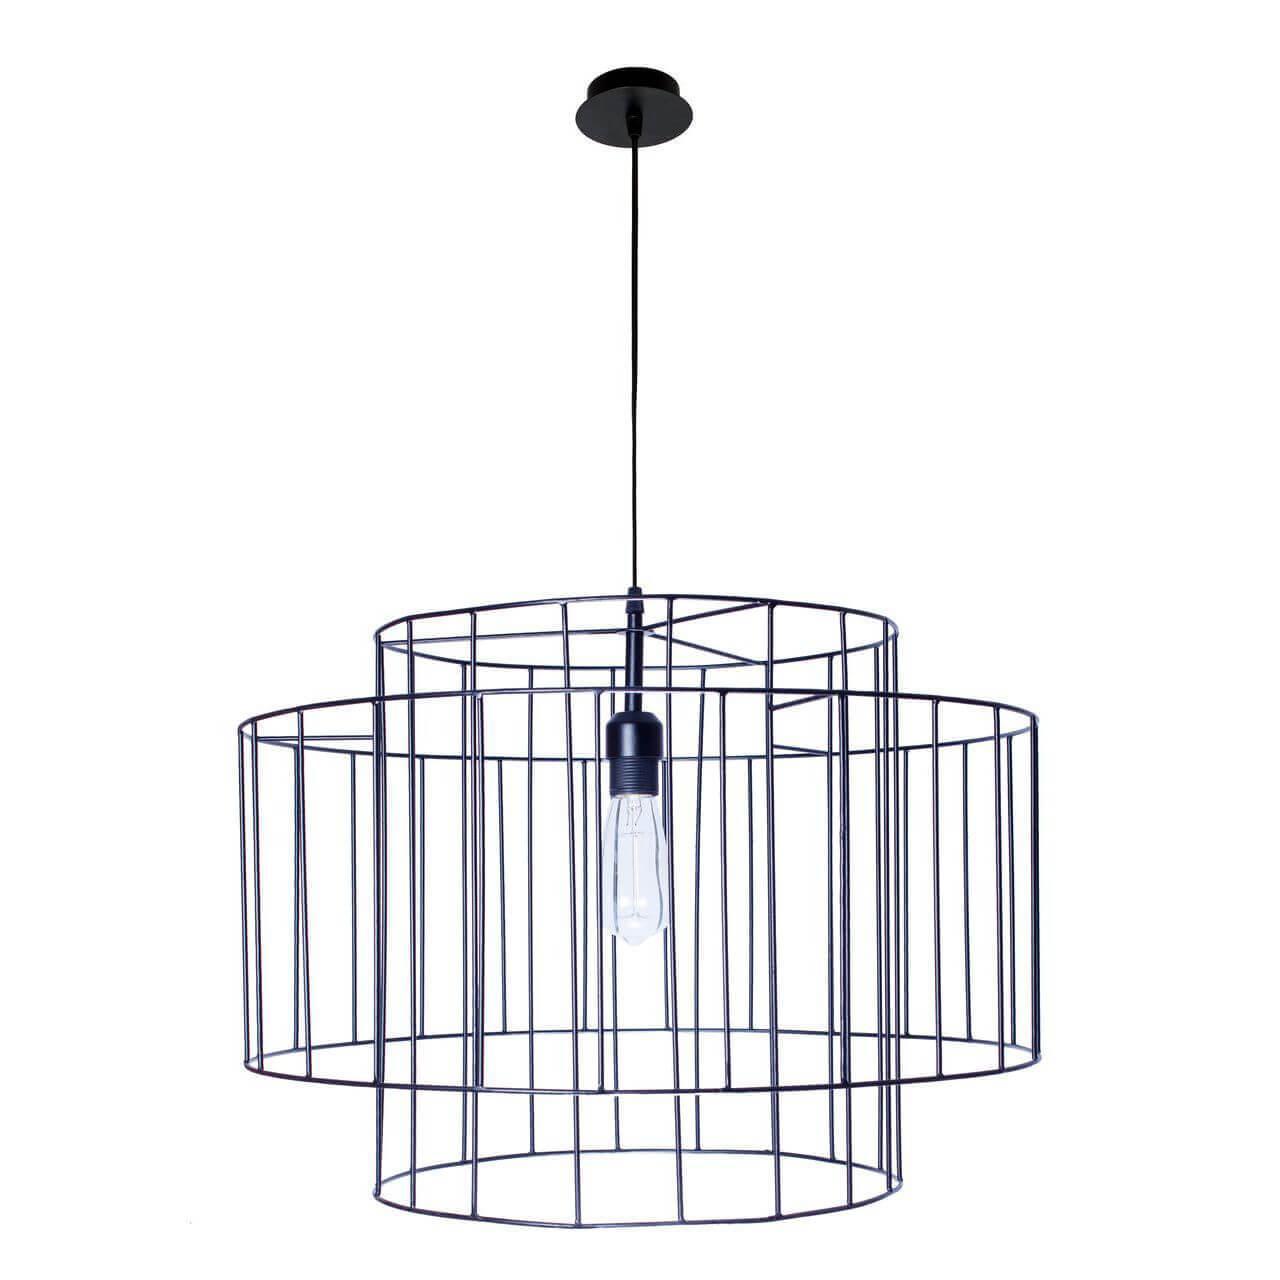 Cage Two S1 12 Подвесной светильник TopDecor Cage Two